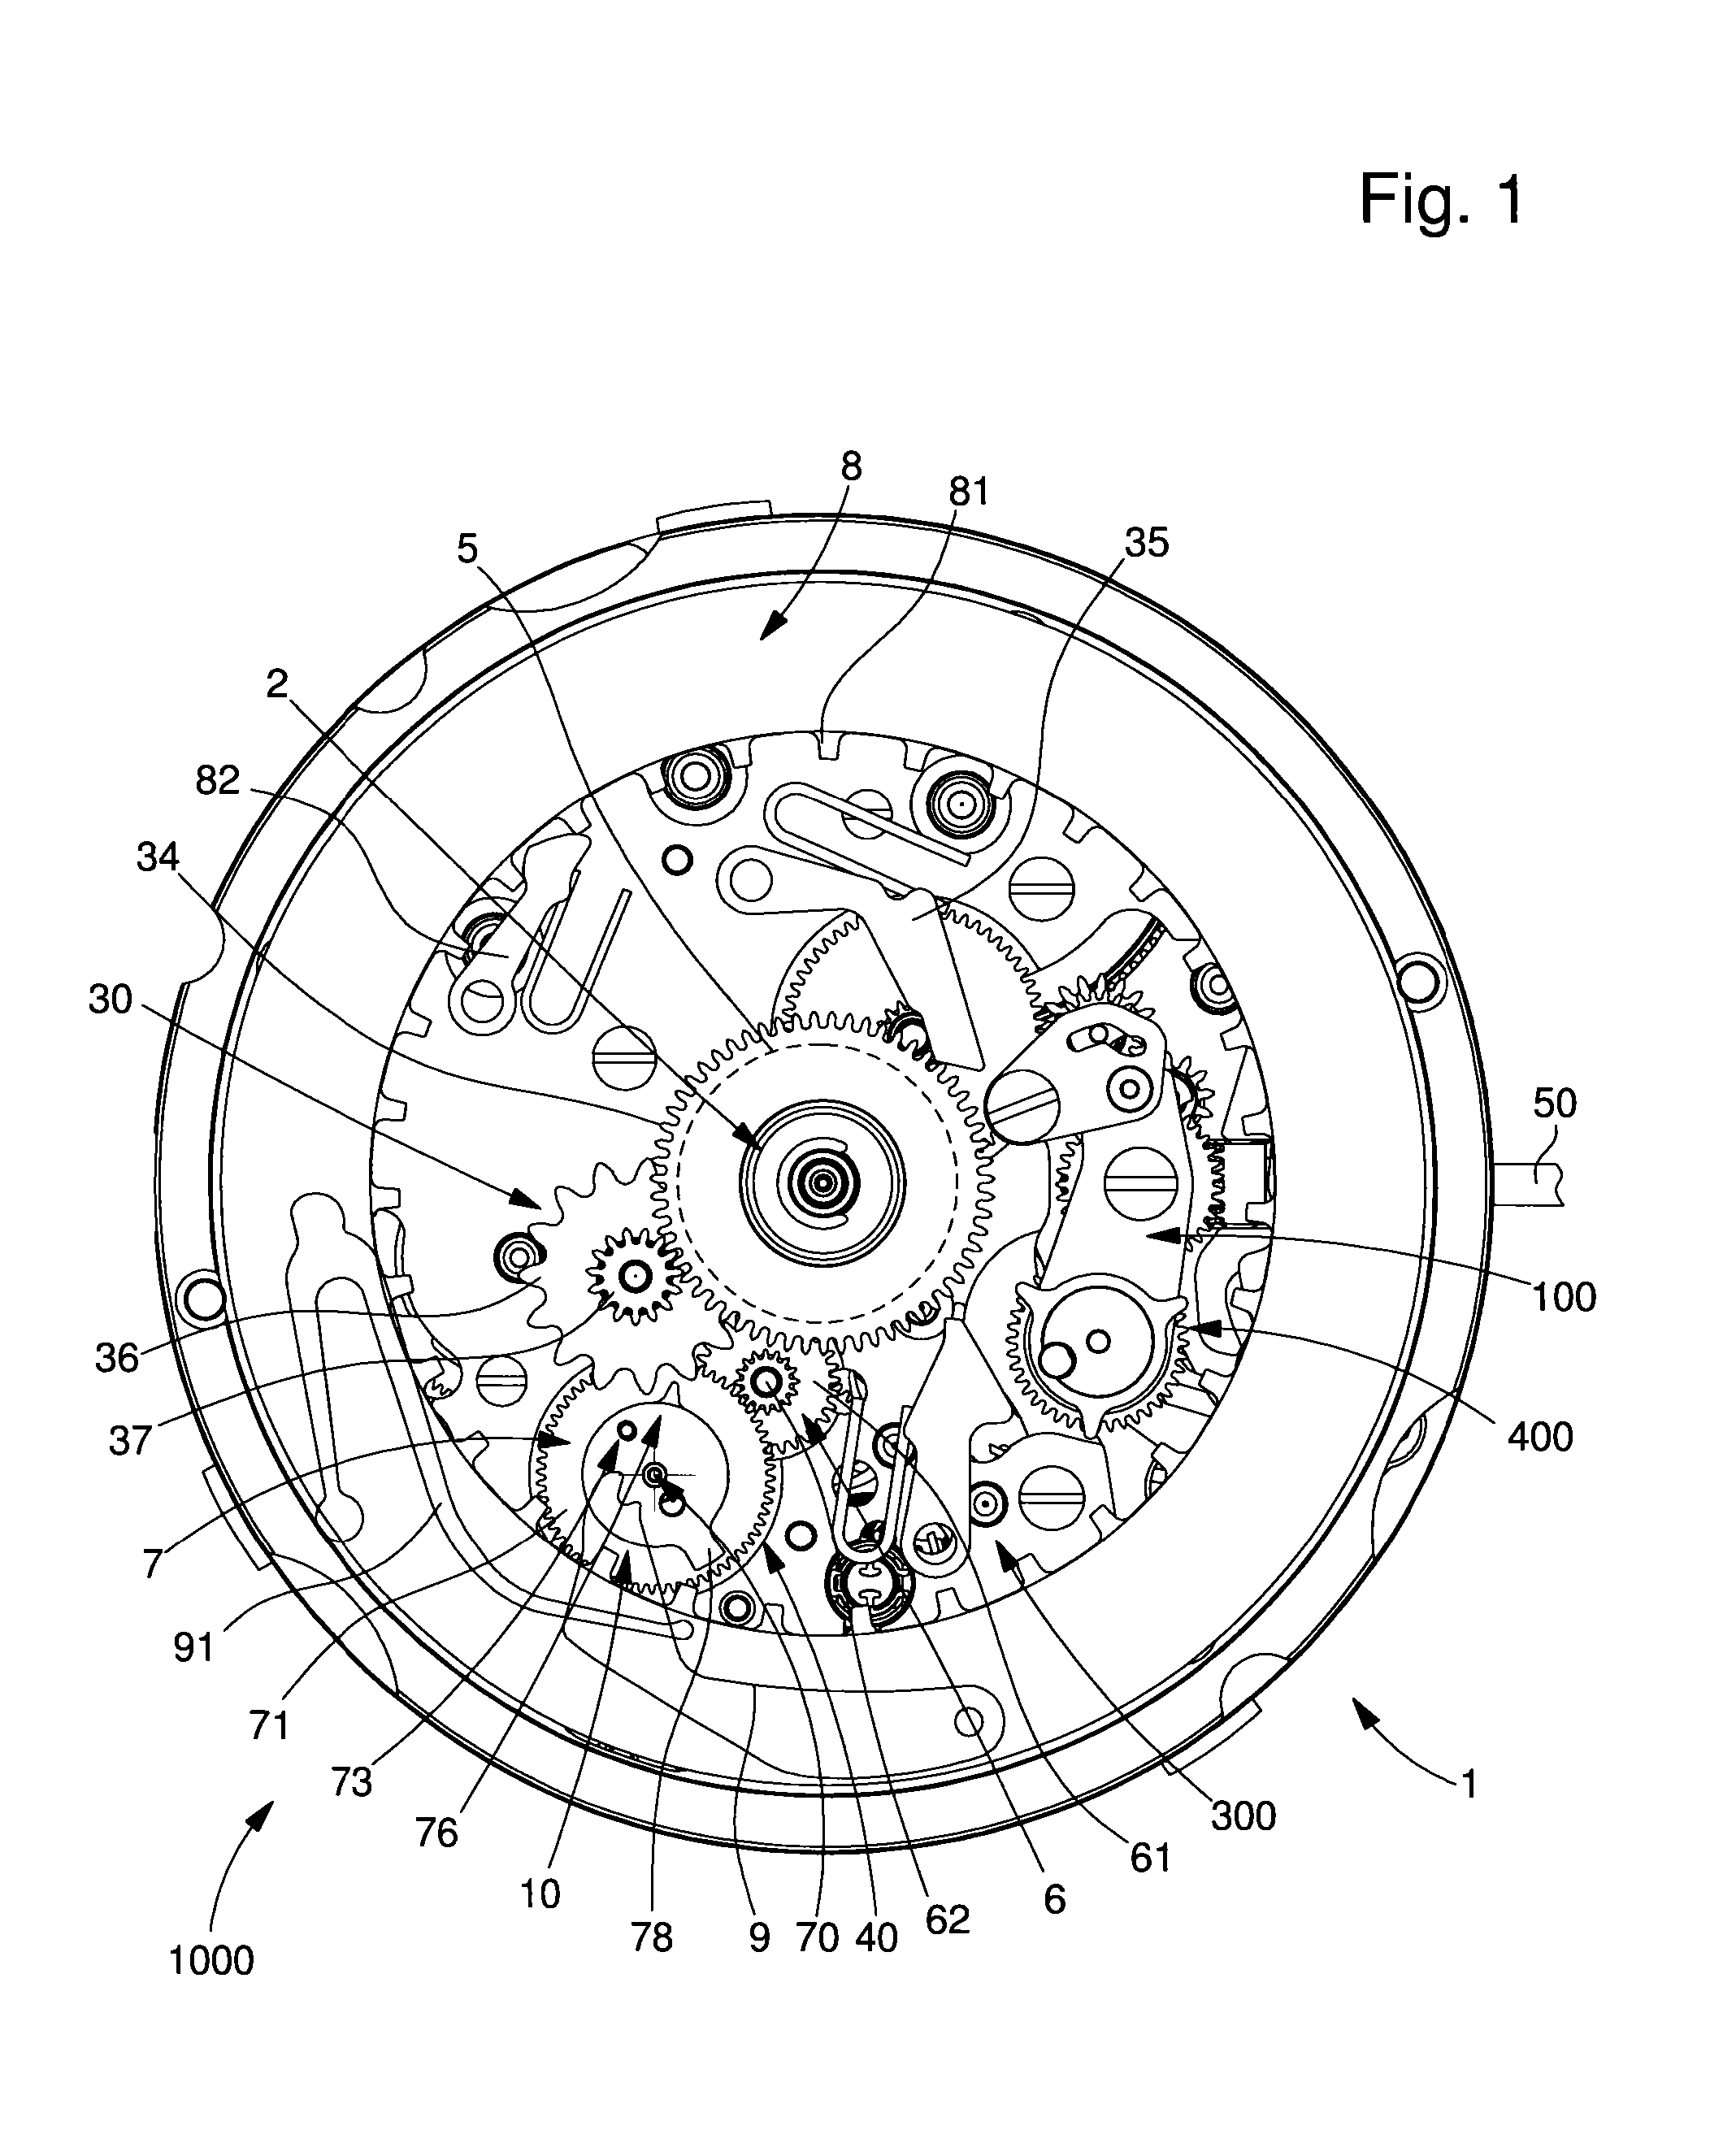 Mechanism for displaying and correcting the state of two different time measurable quantities